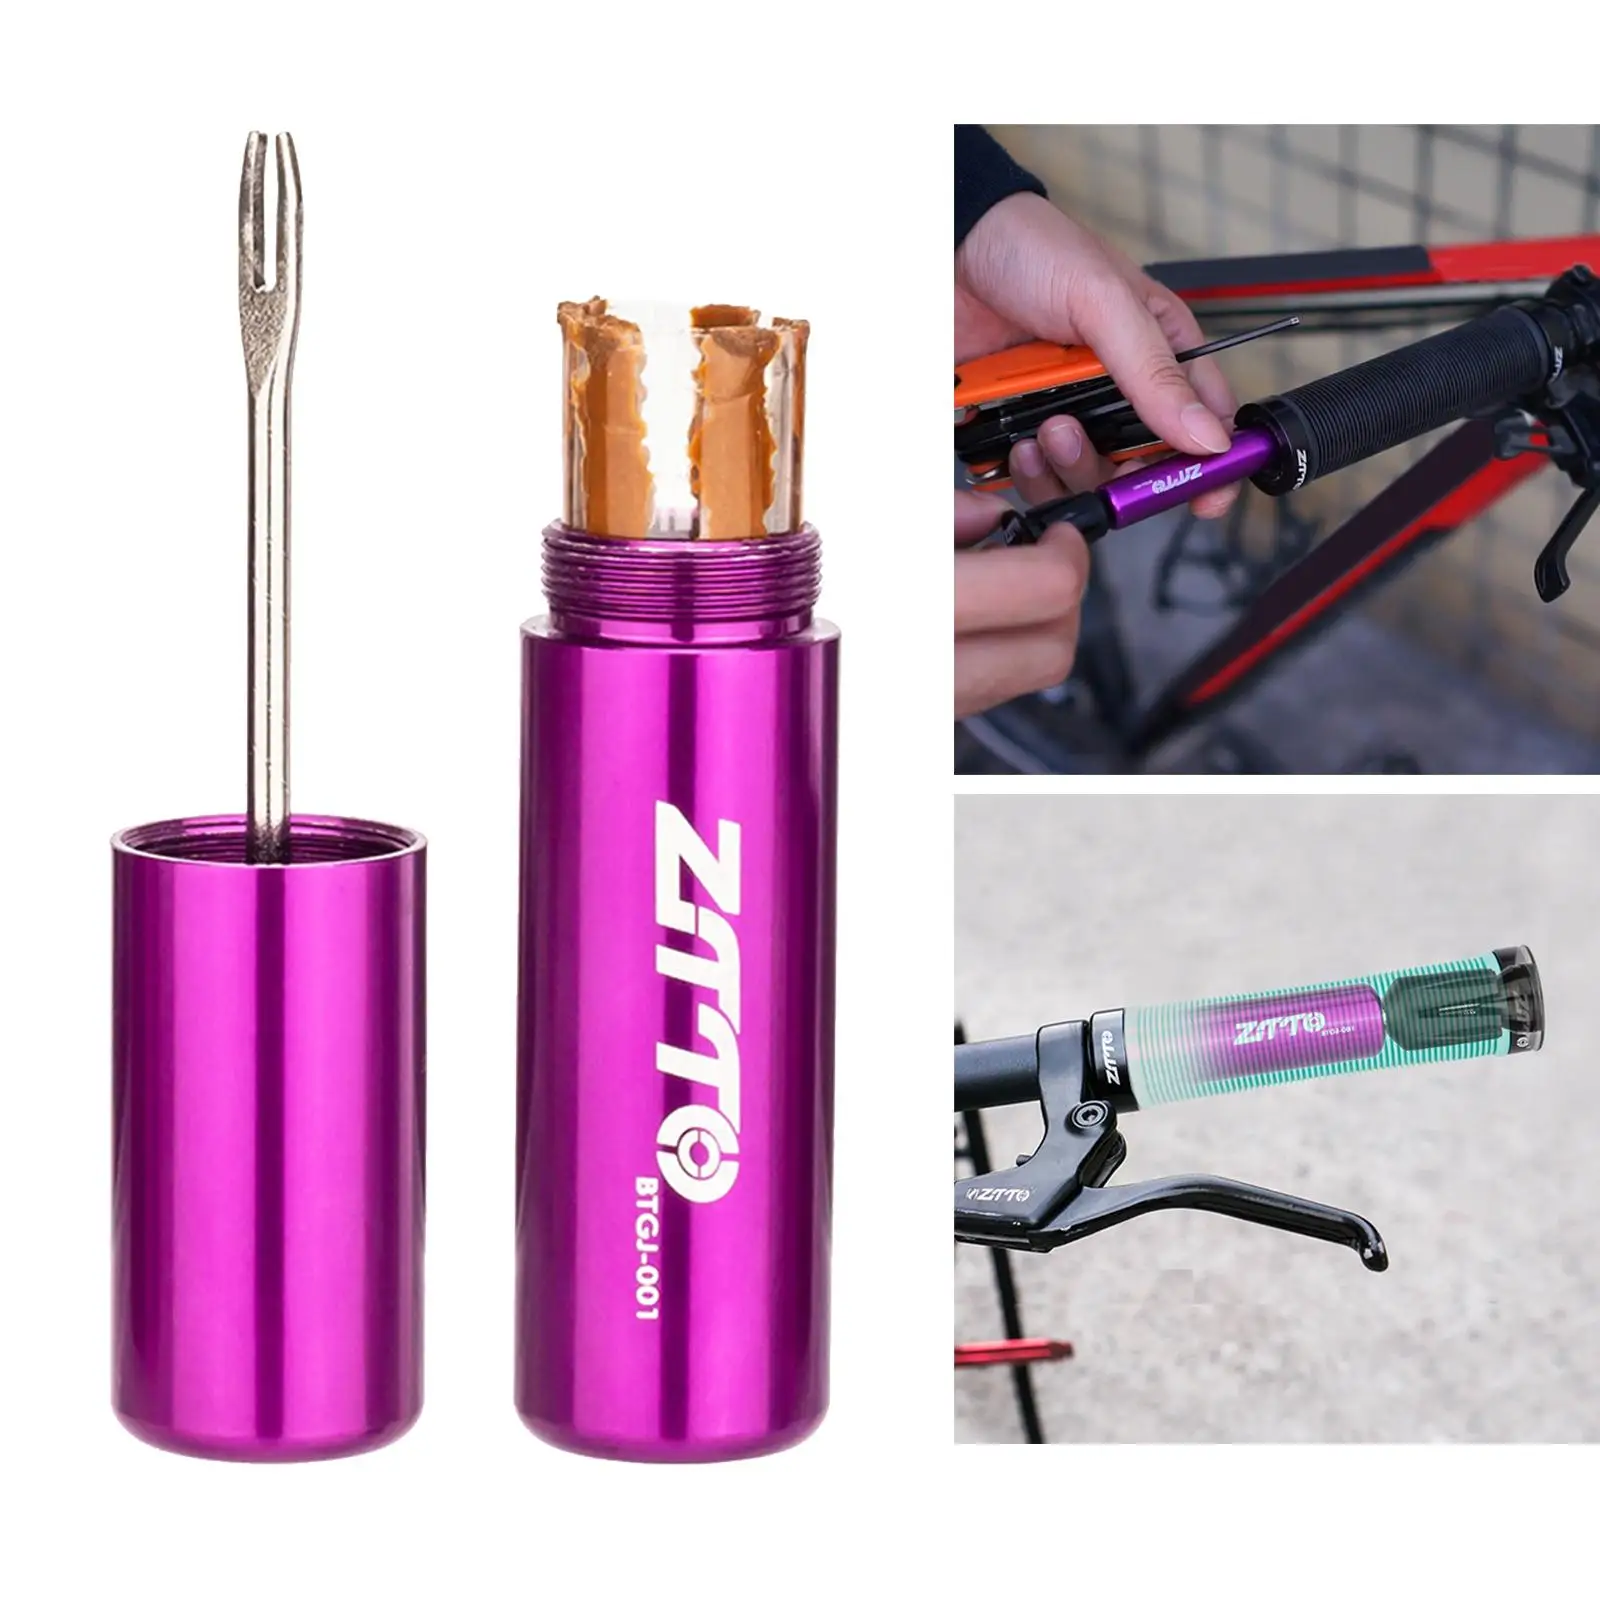 Cycling Tubeless Bike Tire Repair Kit, Patch Puncture Mountain Bicycle Tires